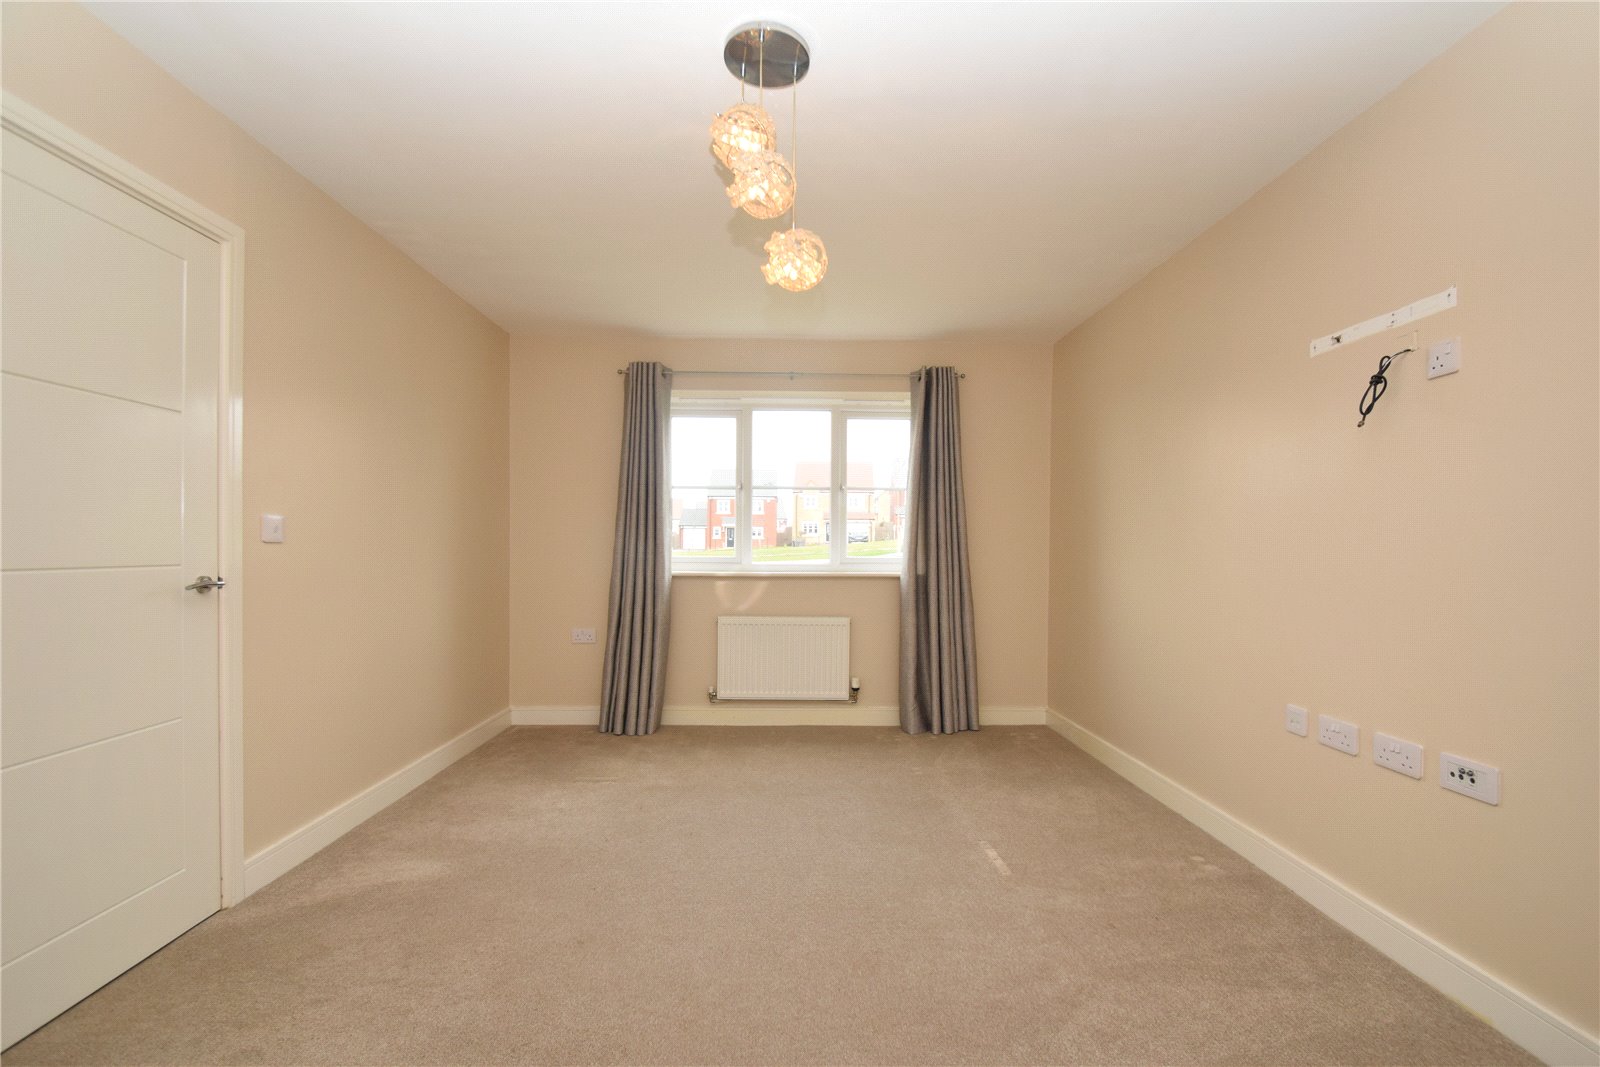 4 bed house for sale in Badger Lane, Middle Deepdale  - Property Image 3